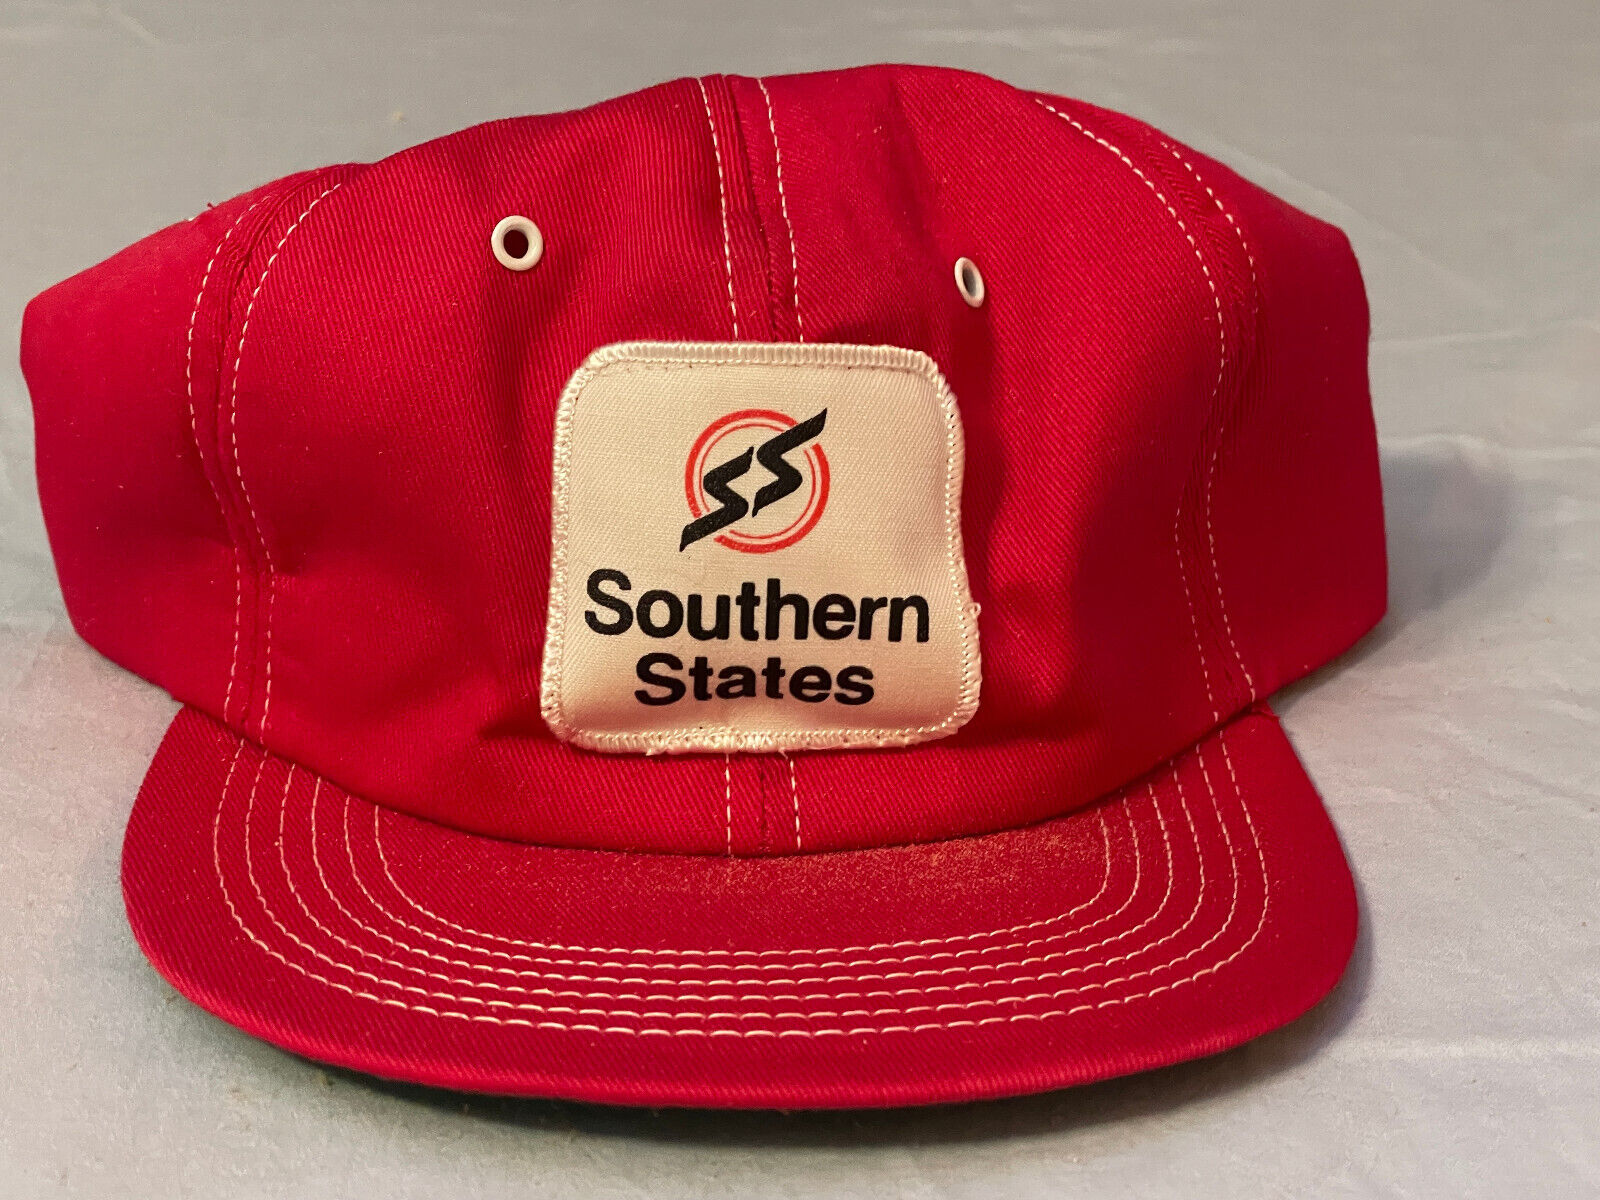 Vintage Genuine 1970's Southern States SS Red SnapBack Trucker Hat